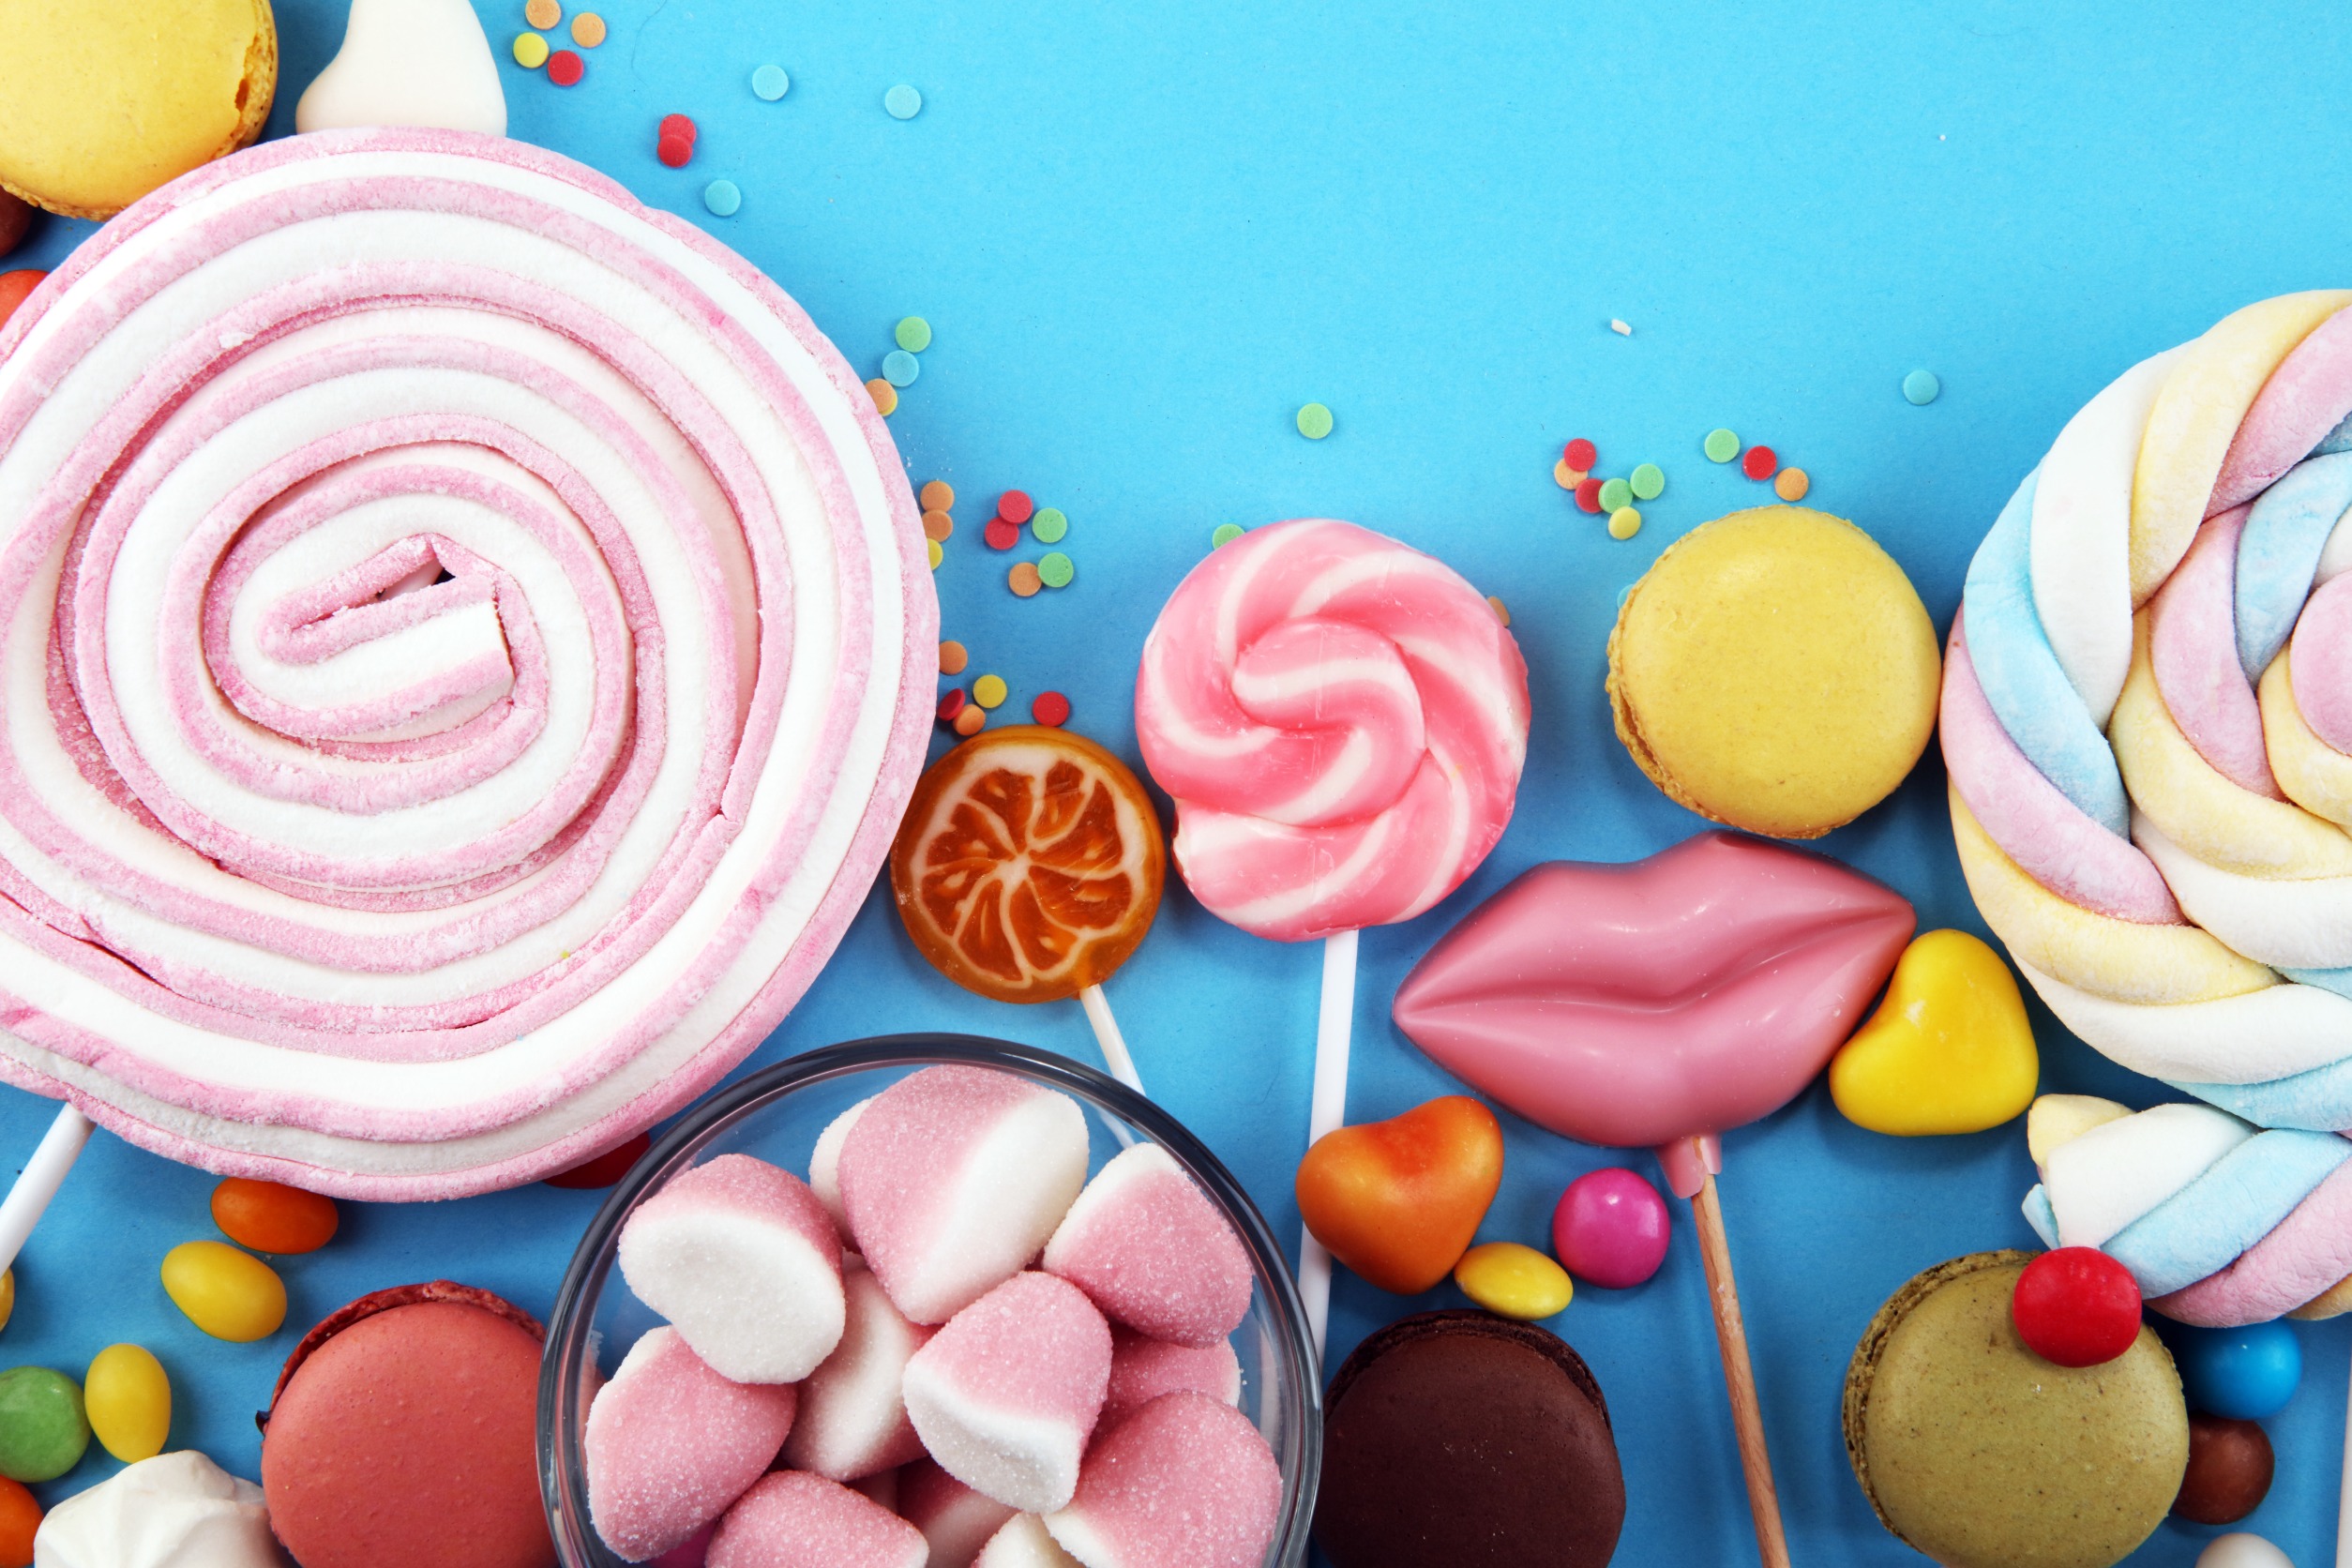 healthy candy and confectionery ingredients arranged in a semicircle against a bright blue background